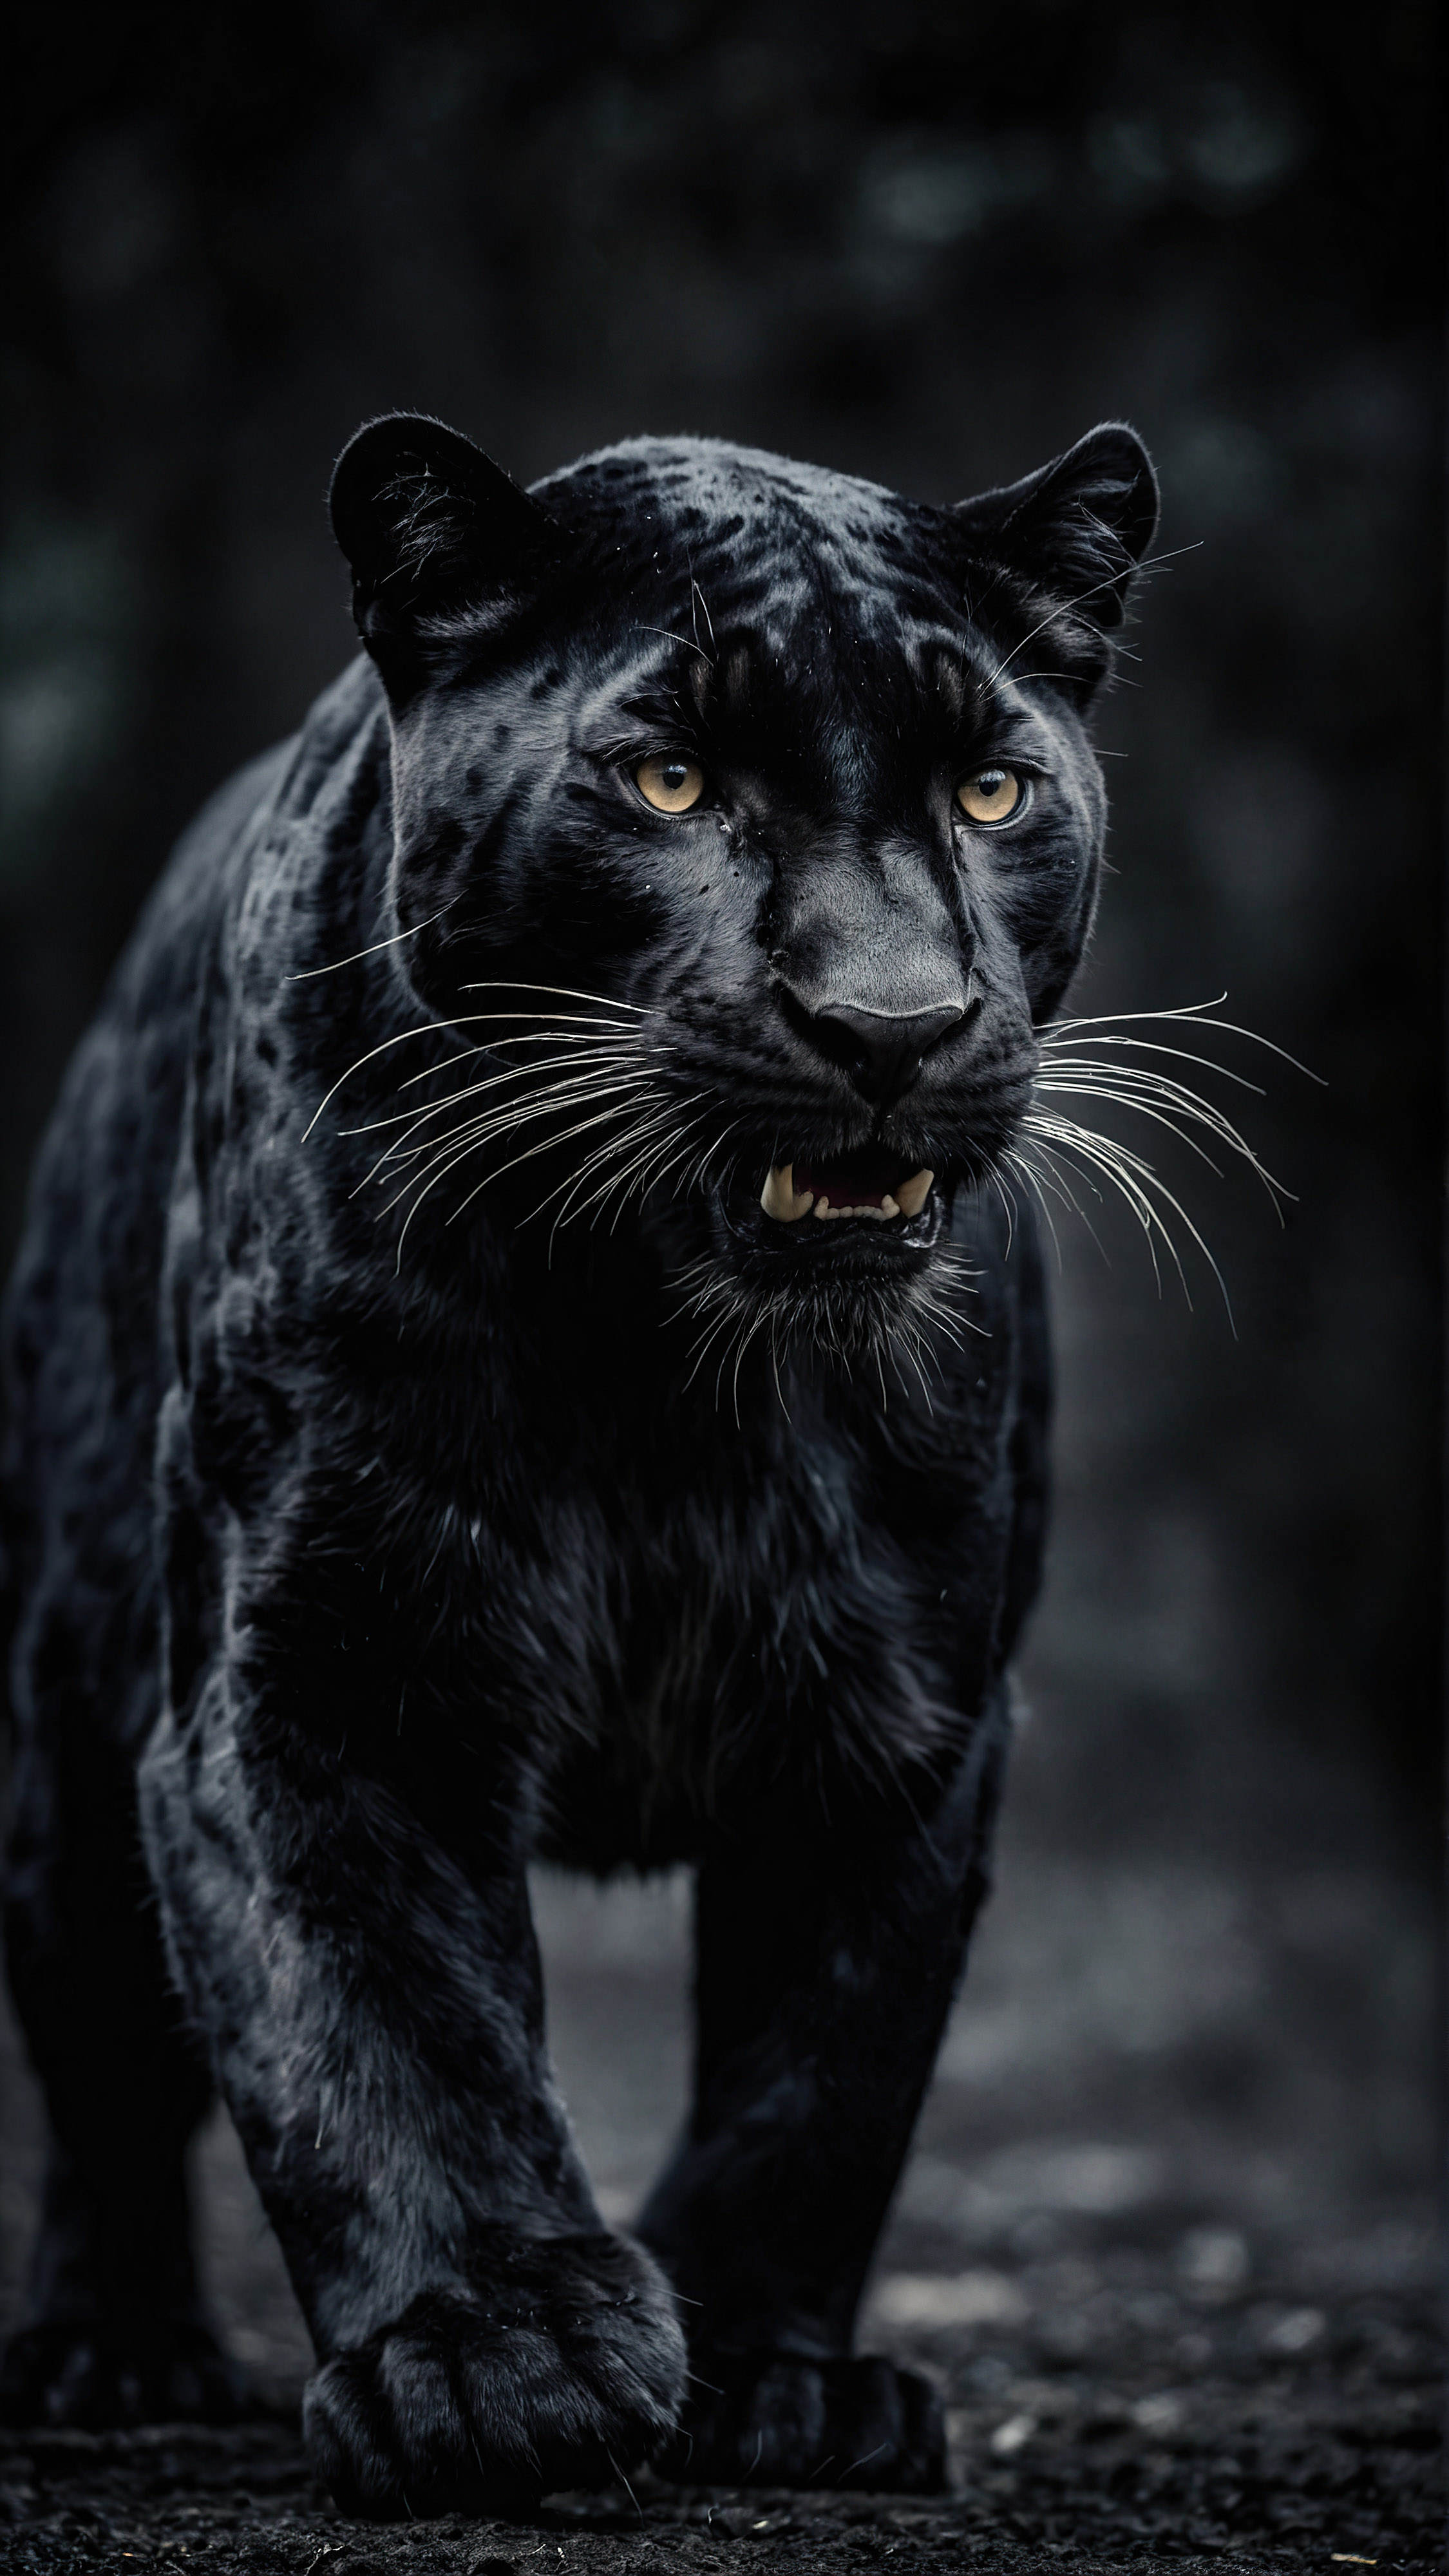 Capture the essence of the wild with our black background for iPhone, featuring a black panther in motion against a dark background, its eyes intensely focused.